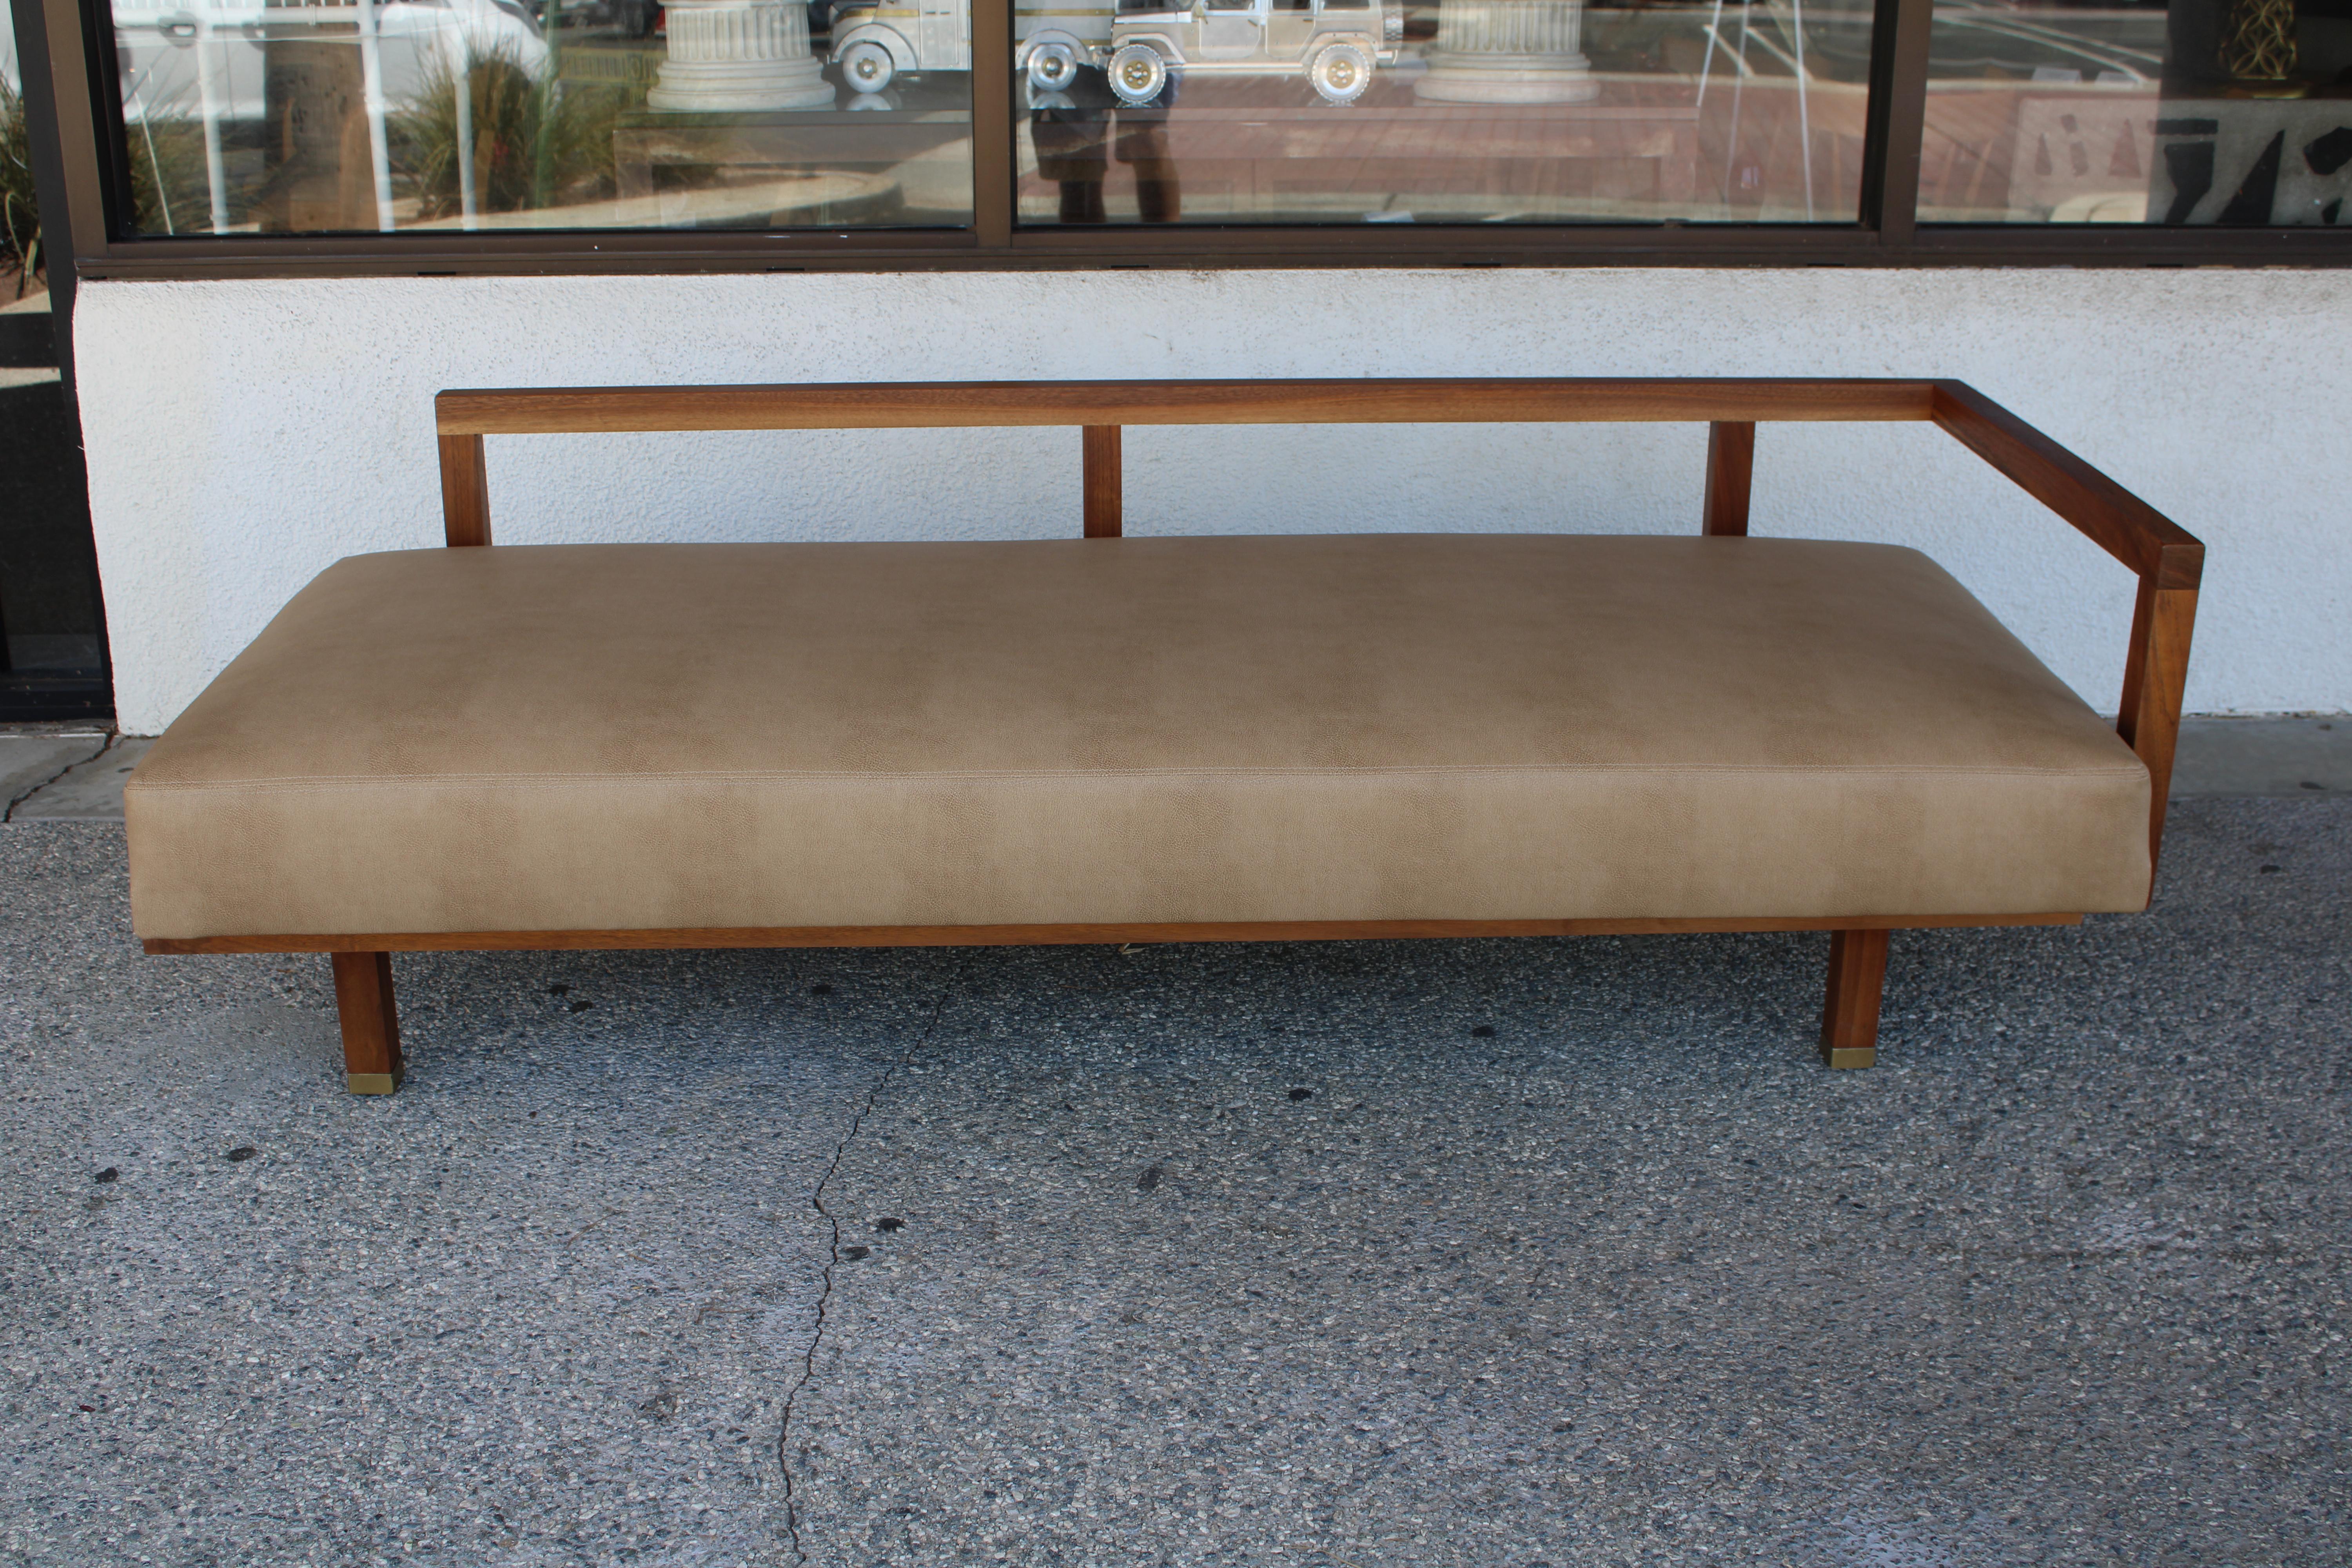 Articulating daybed created by Oakland Hills architect Martin Borenstein. This daybed allows the angle of the seat to adjust for seating or napping. A hinged walnut bar in the front allows you to lower the height by two inches. Made of solid walnut.